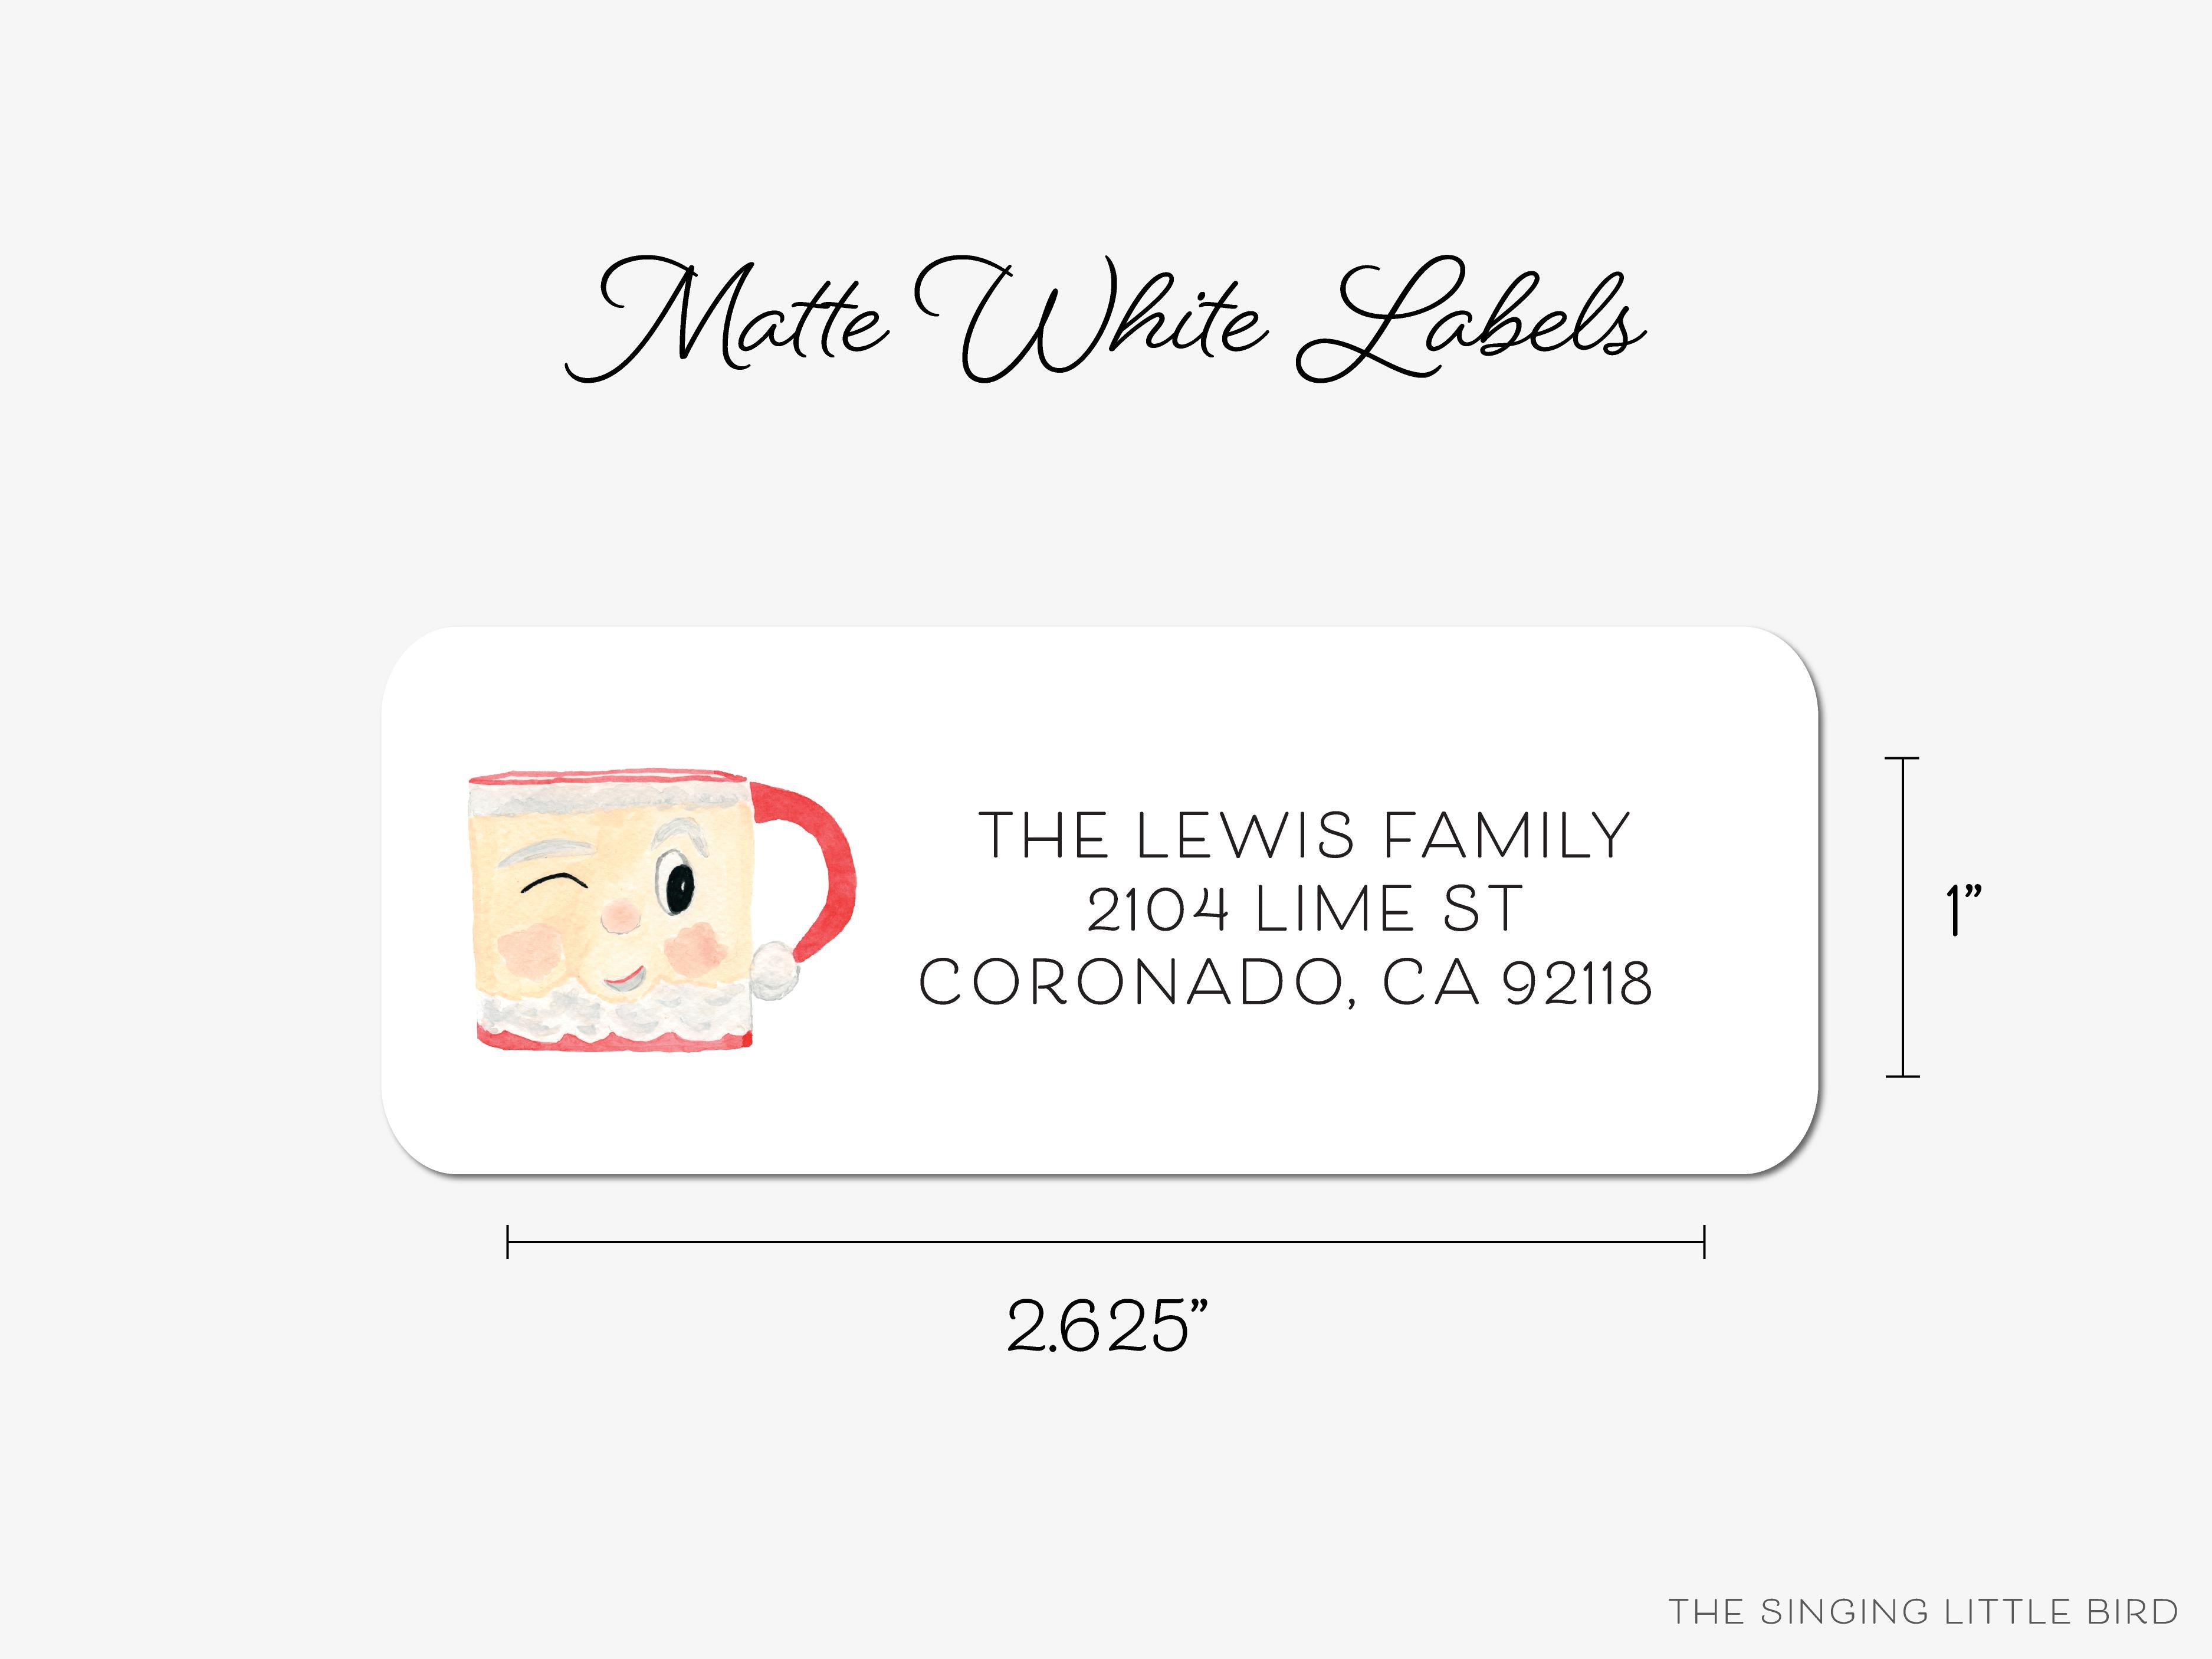 Santa Mug Return Address Labels-These personalized return address labels are 2.625" x 1" and feature our hand-painted watercolor Santa Mug, printed in the USA on beautiful matte finish labels. These make great gifts for yourself or the Christmas lover.-The Singing Little Bird